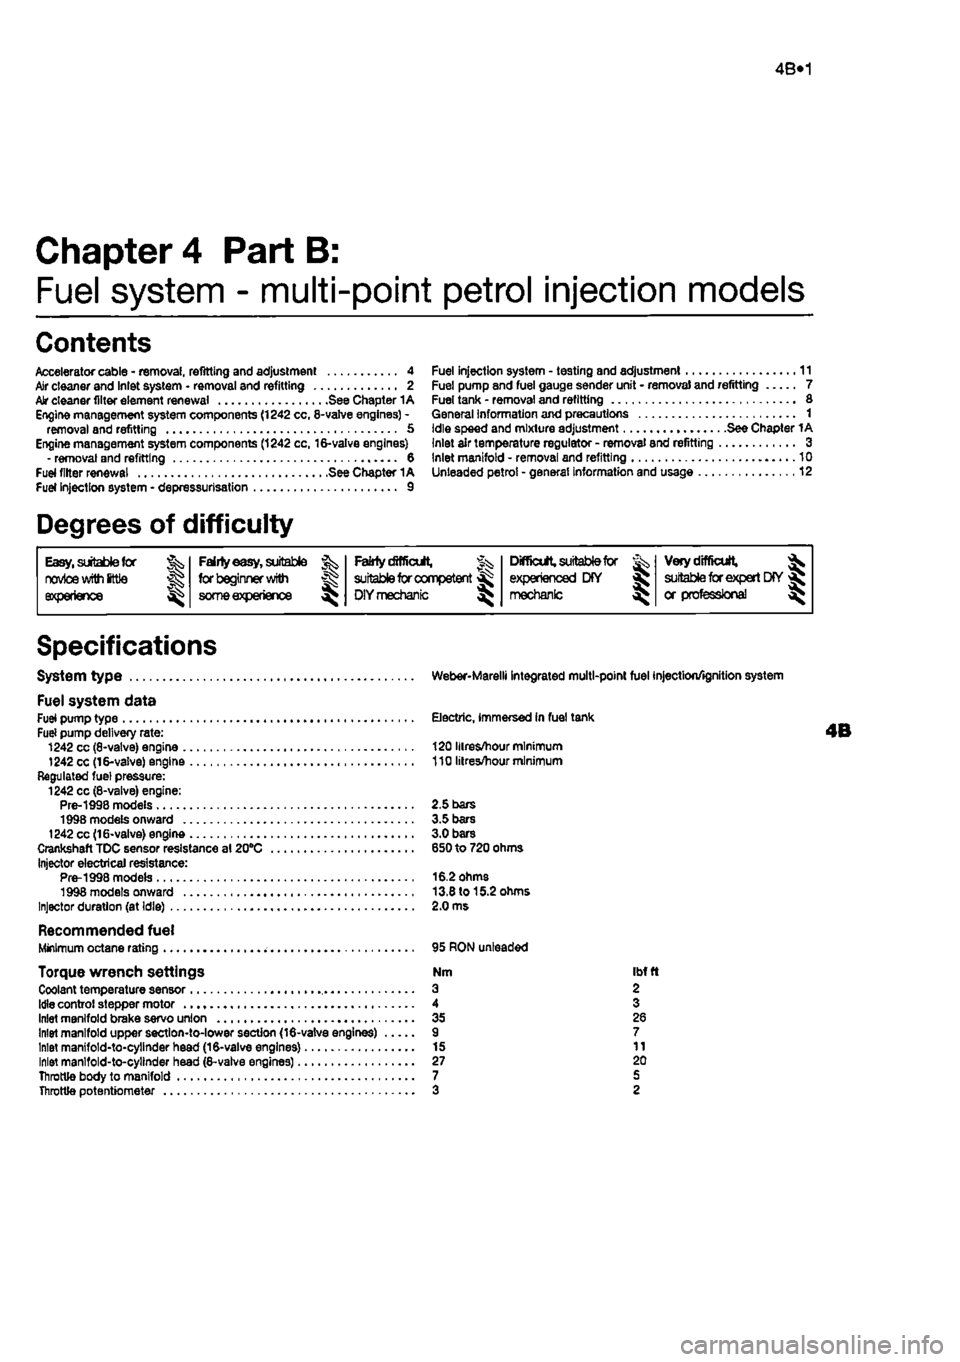 FIAT PUNTO 1998 176 / 1.G Workshop Manual 
4B*1 
Chapter 4 Part B: 
Fuel system - multi-point petrol injection models 
Contents 
Accelerator cable - removal, refitting and adjustment 4 Air cleaner and Inlet system • removal and refitting 2 